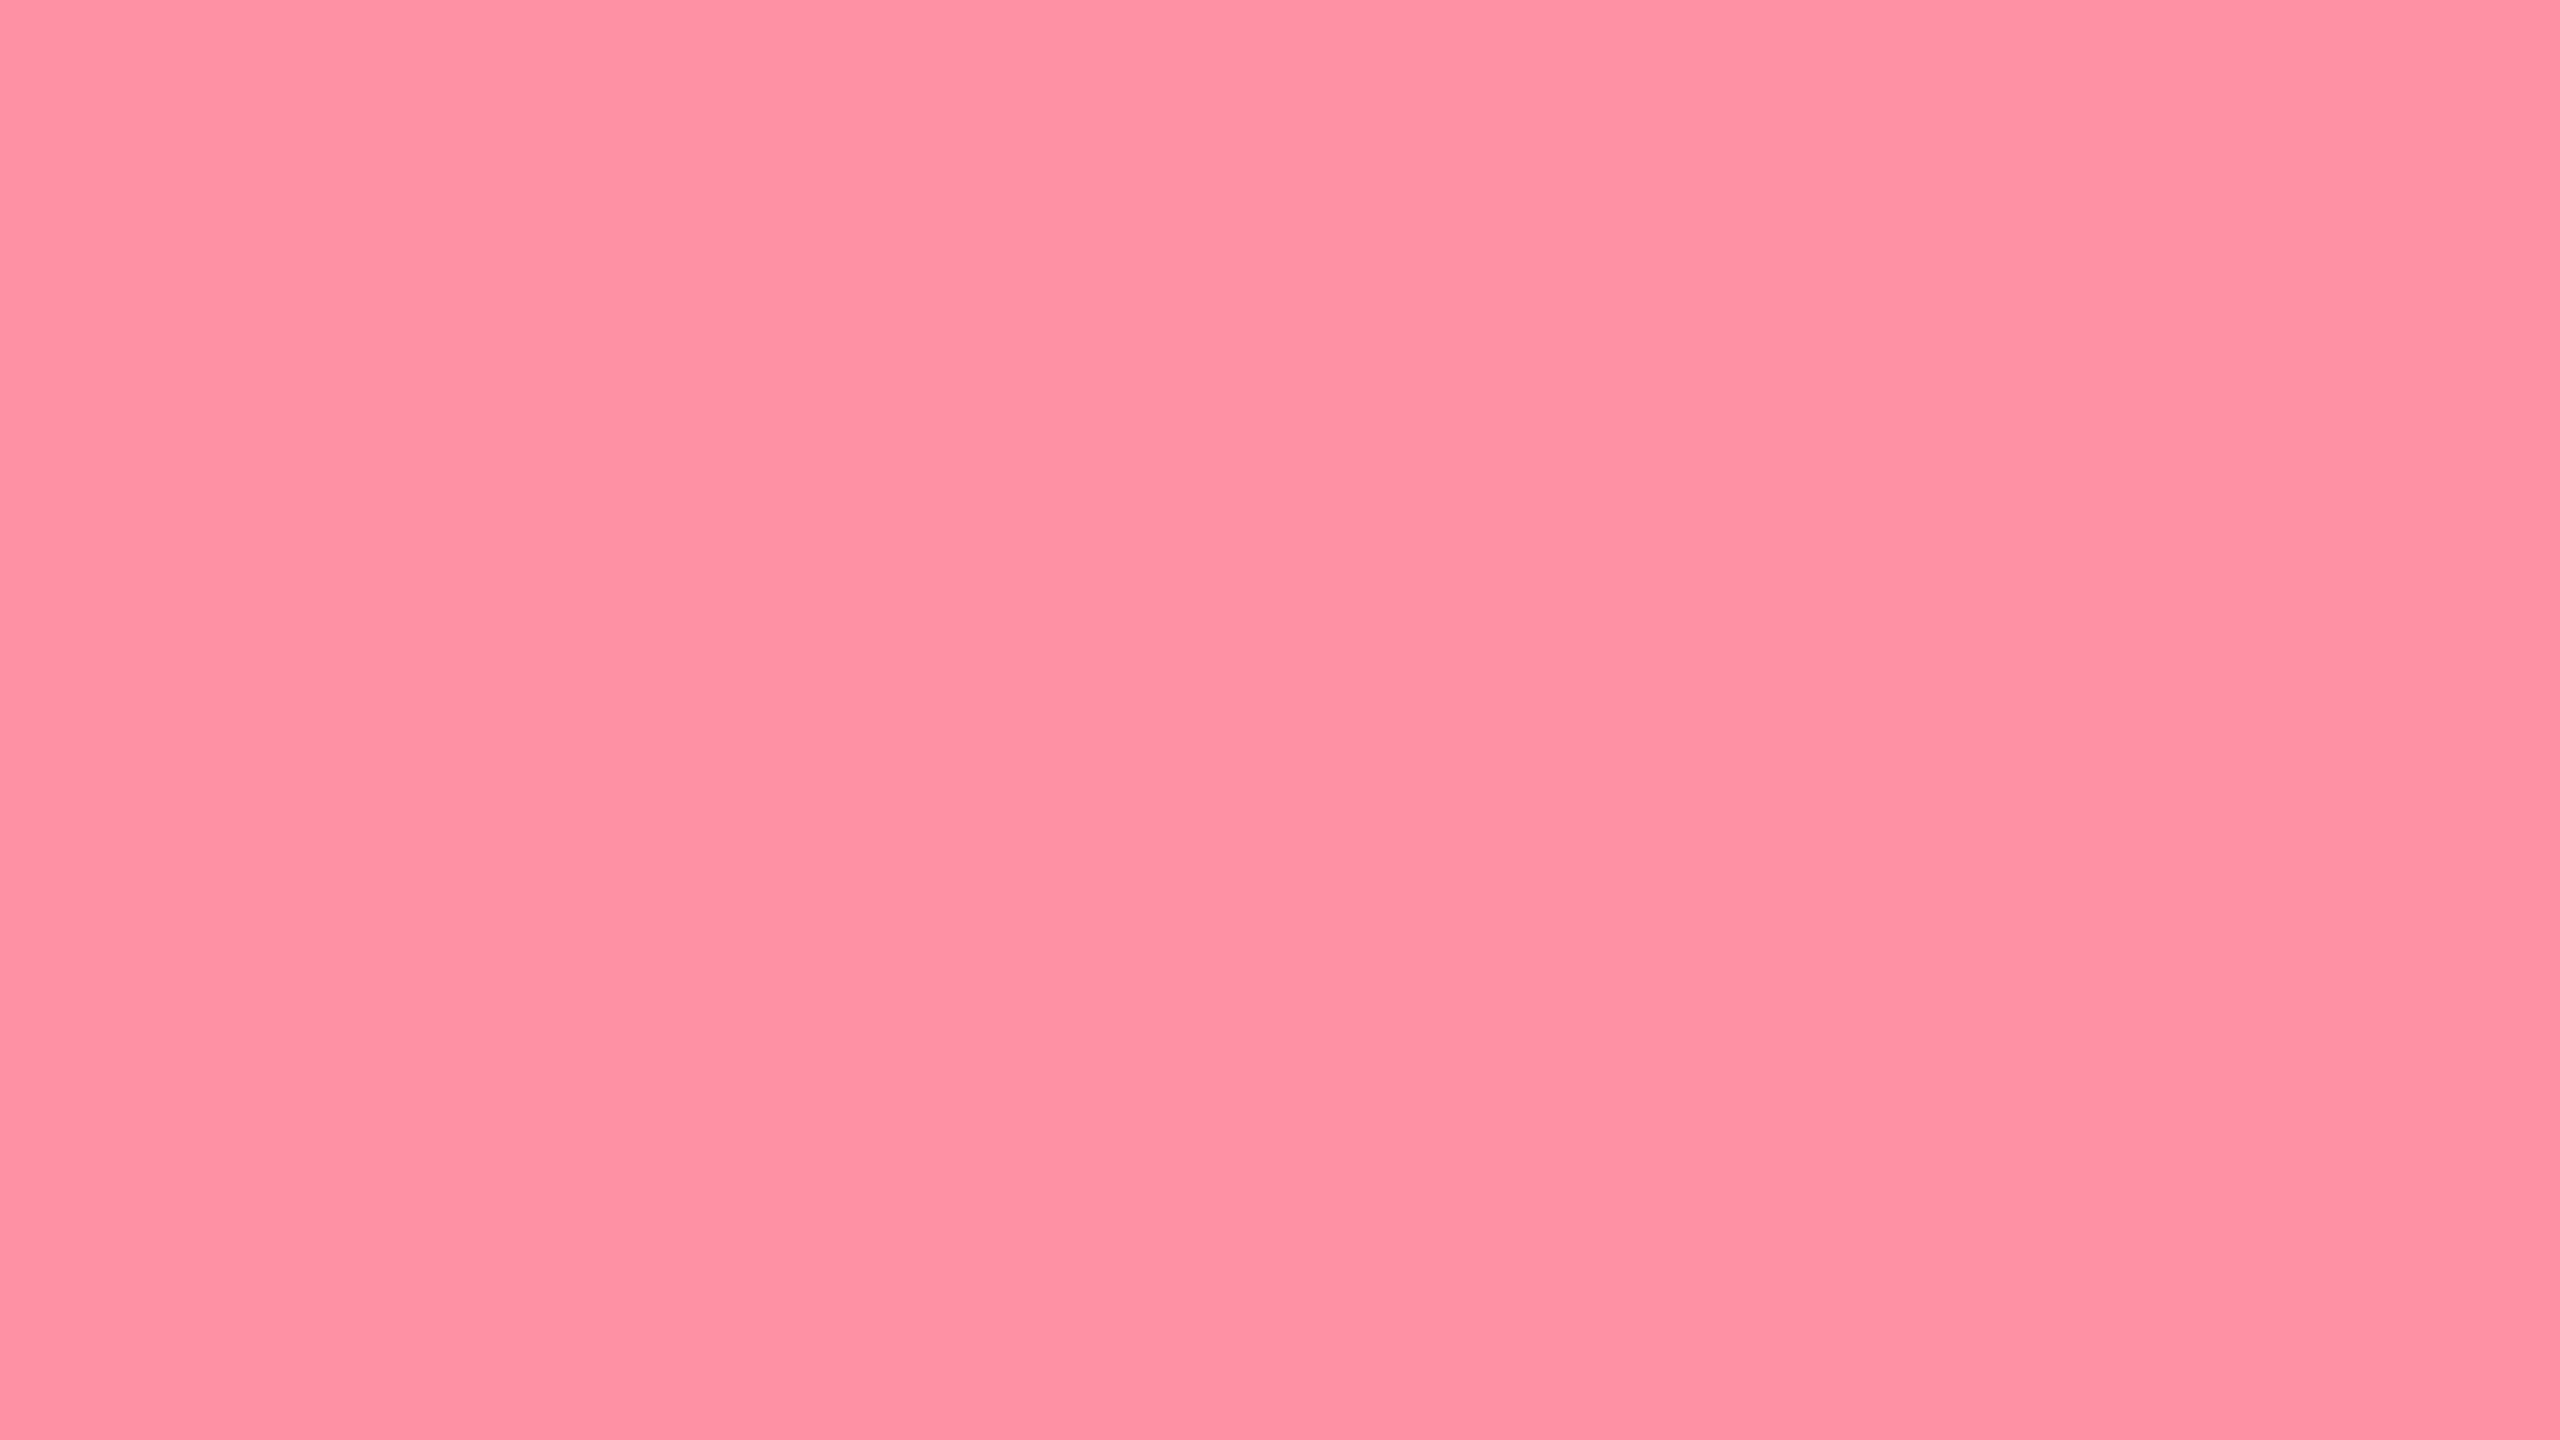 Pin Pink Background Active Desktop Wallpaper Picture On